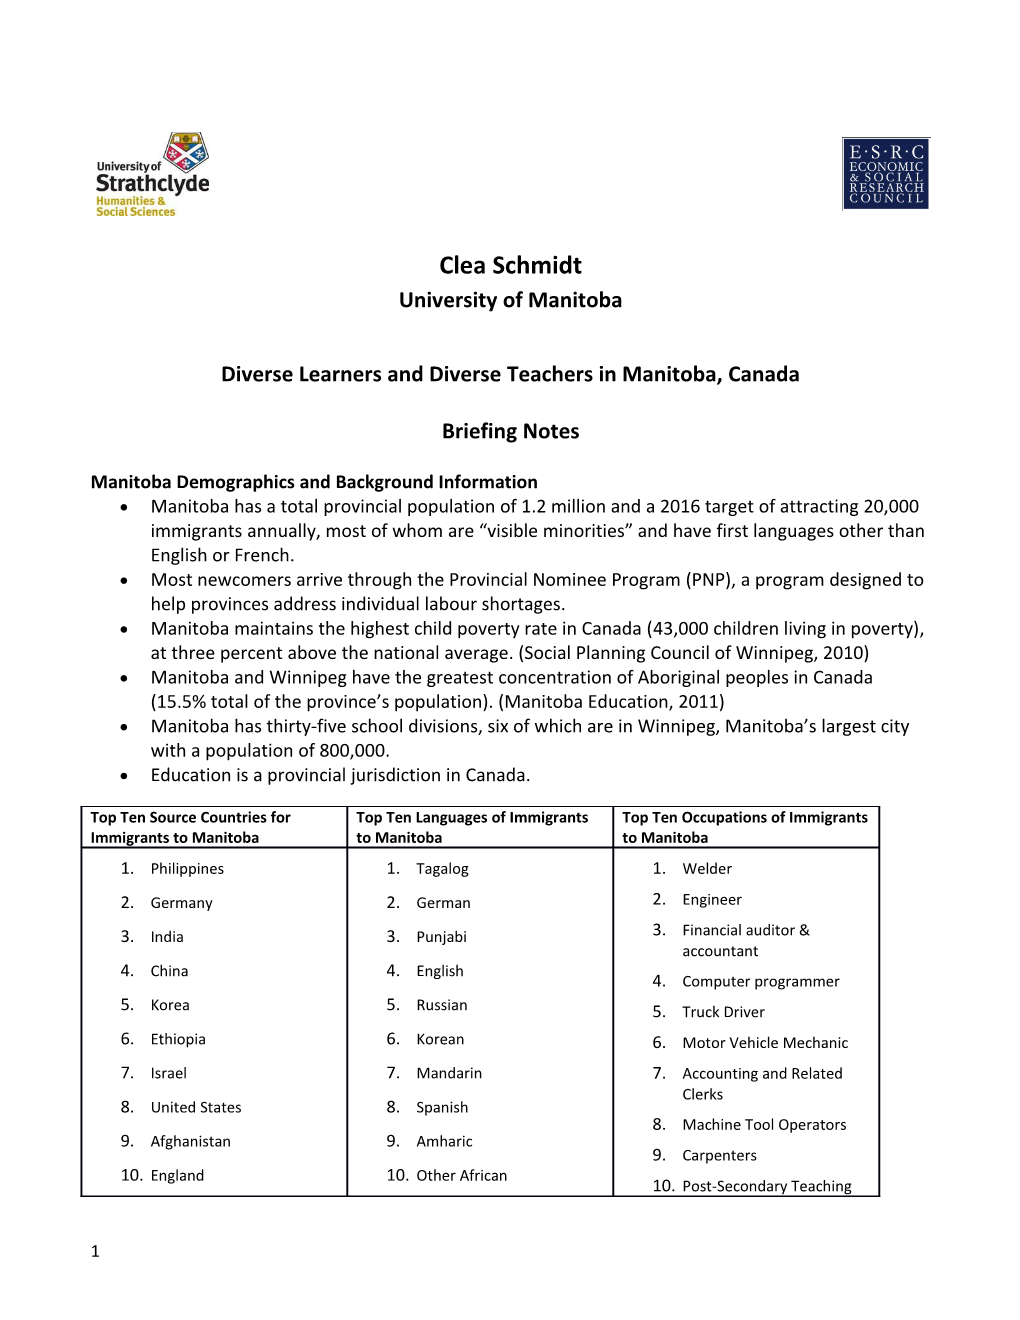 Diverse Learners and Diverse Teachers in Manitoba, Canada